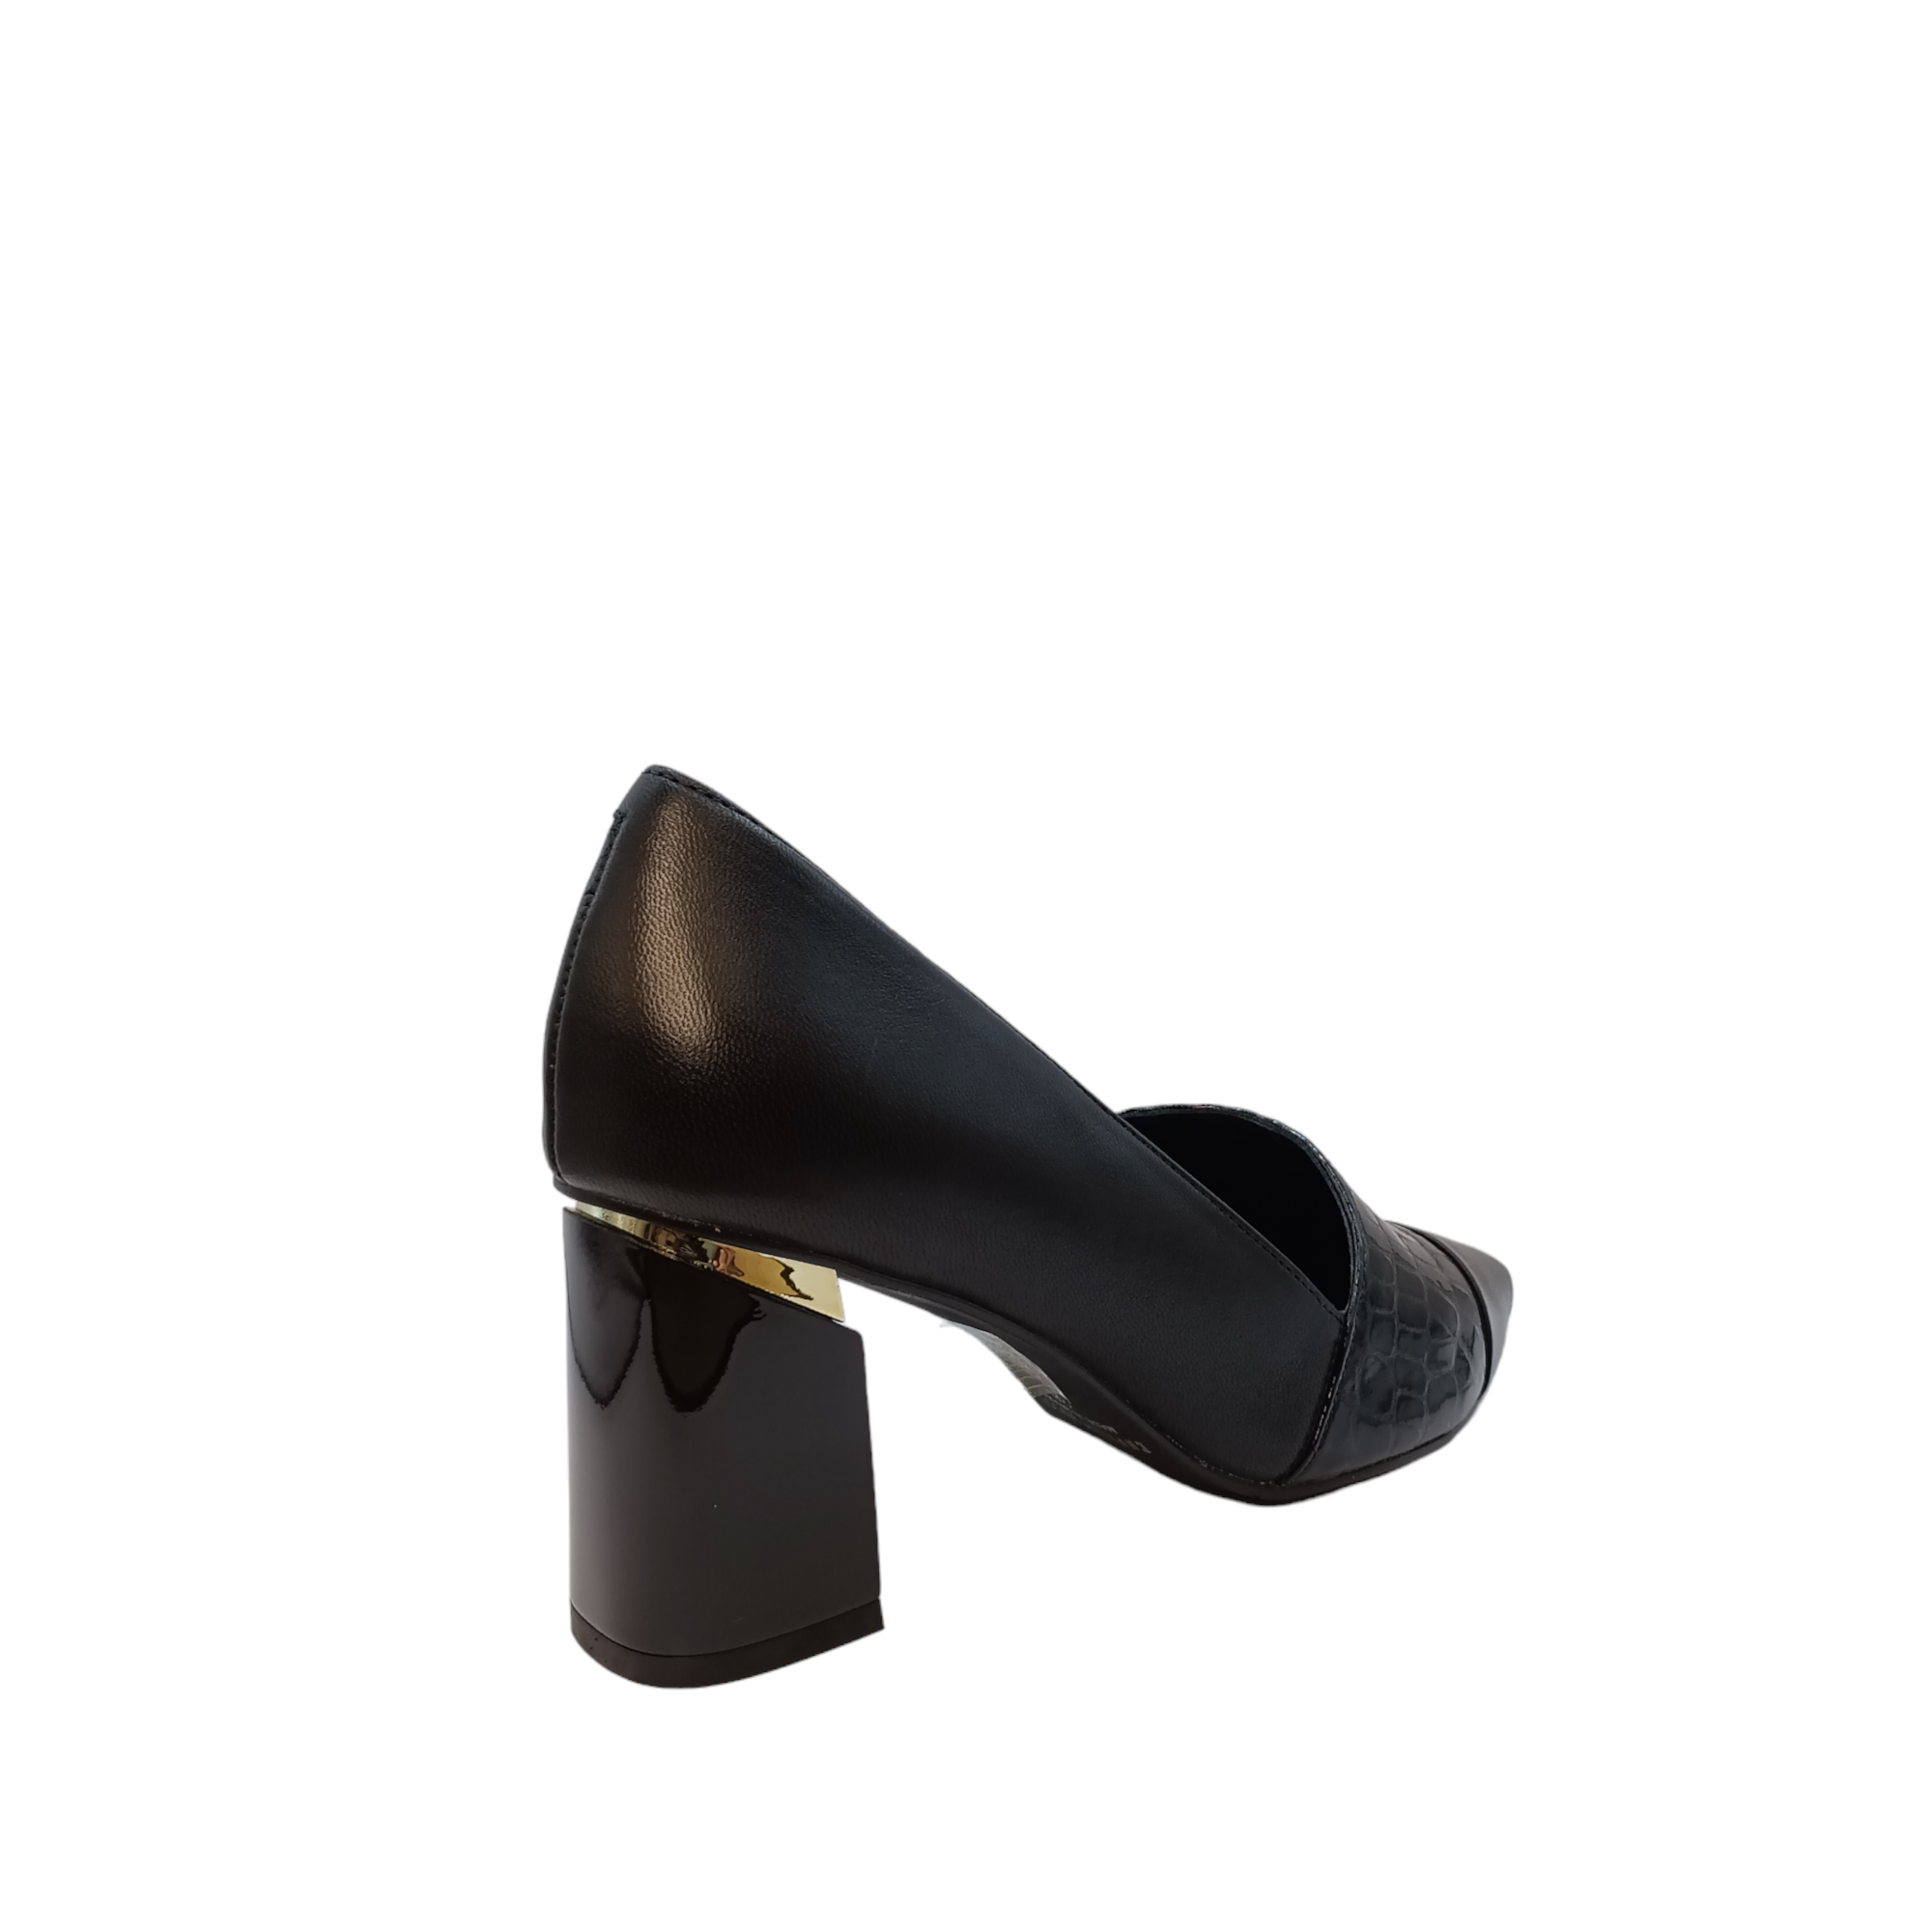 Shop Croft Capelli Rossi - with shoe&me - from Capelli Rossi - Heels - Heel, Summer, Winter, Womens - [collection]